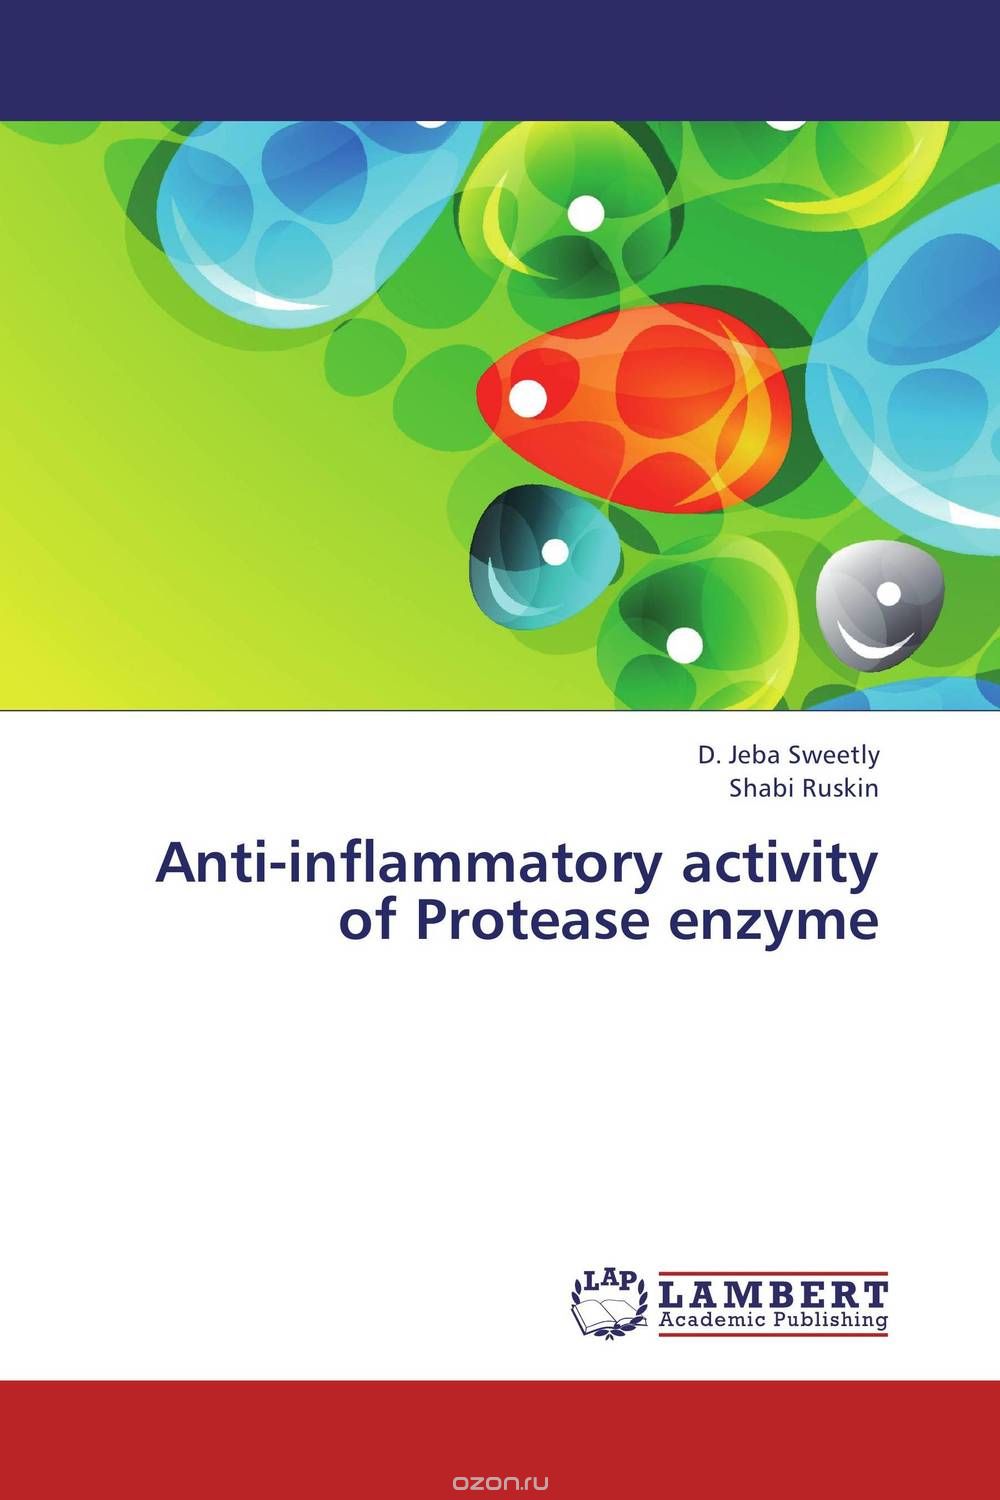 Anti-inflammatory activity of Protease enzyme